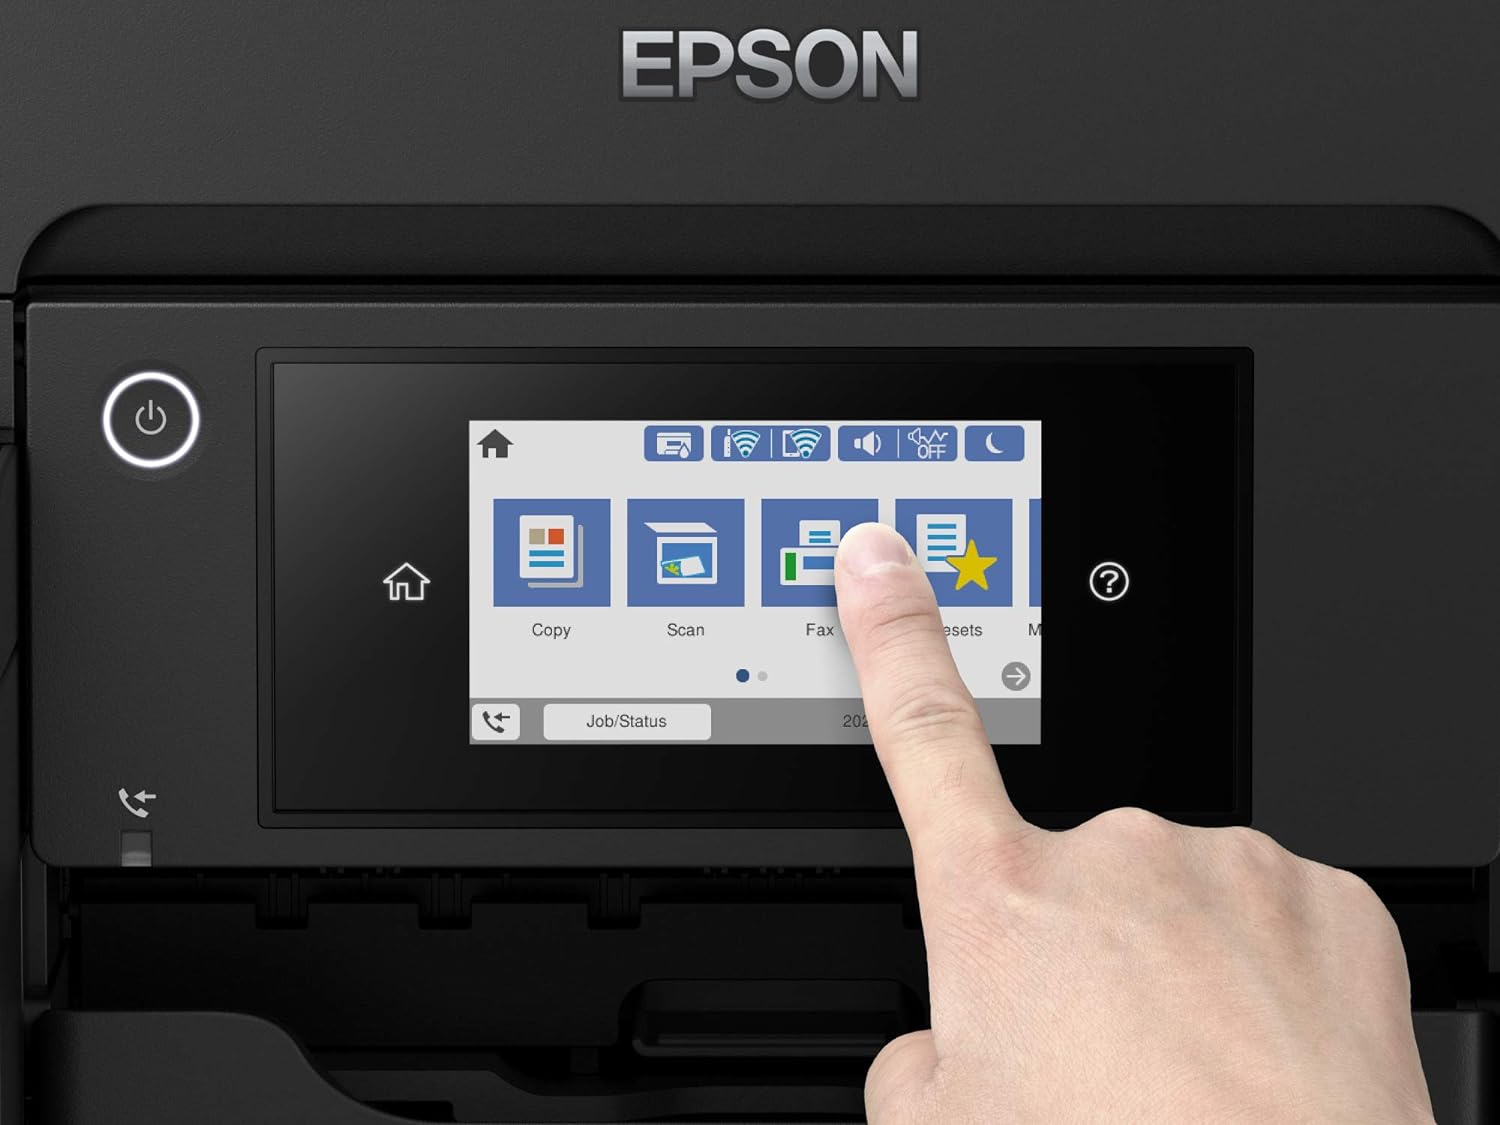 EPSON EcoTank A4 All-in-One 4.3" Touchscreen Wireless Fast Speed Printer